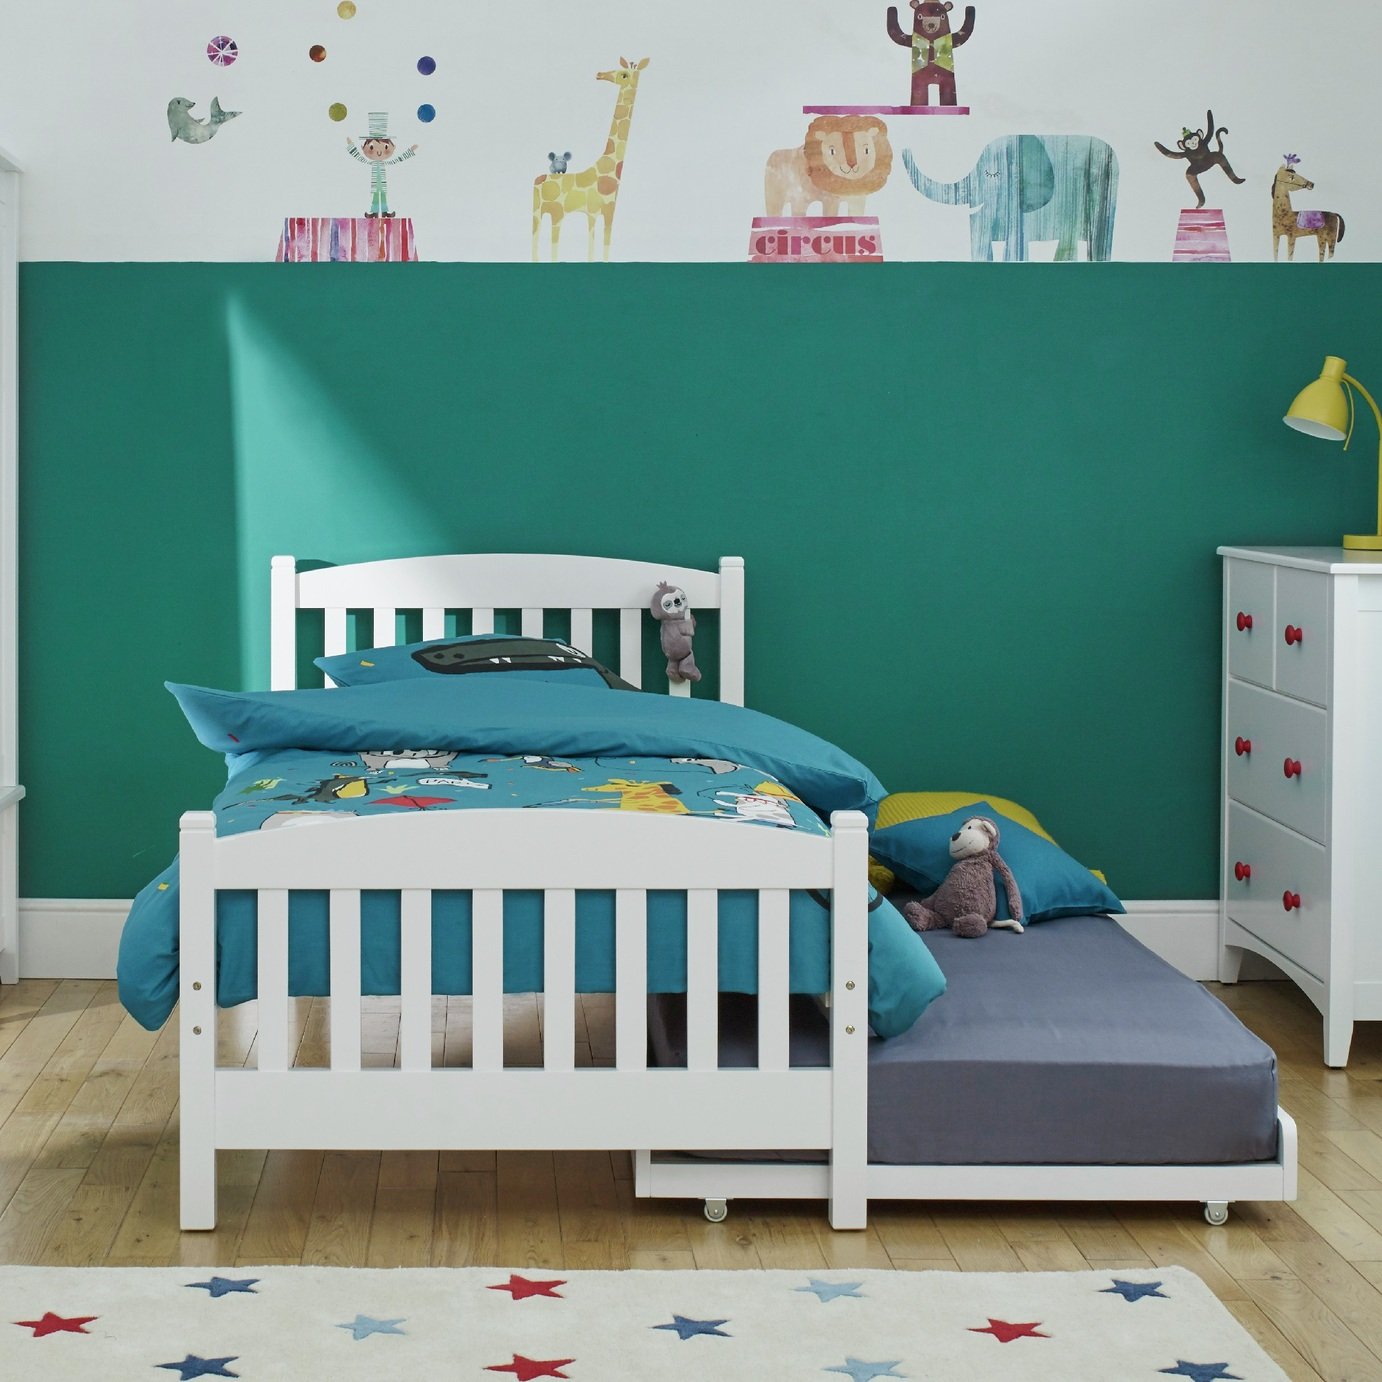 Snowy Single Bed Frame with Trundle